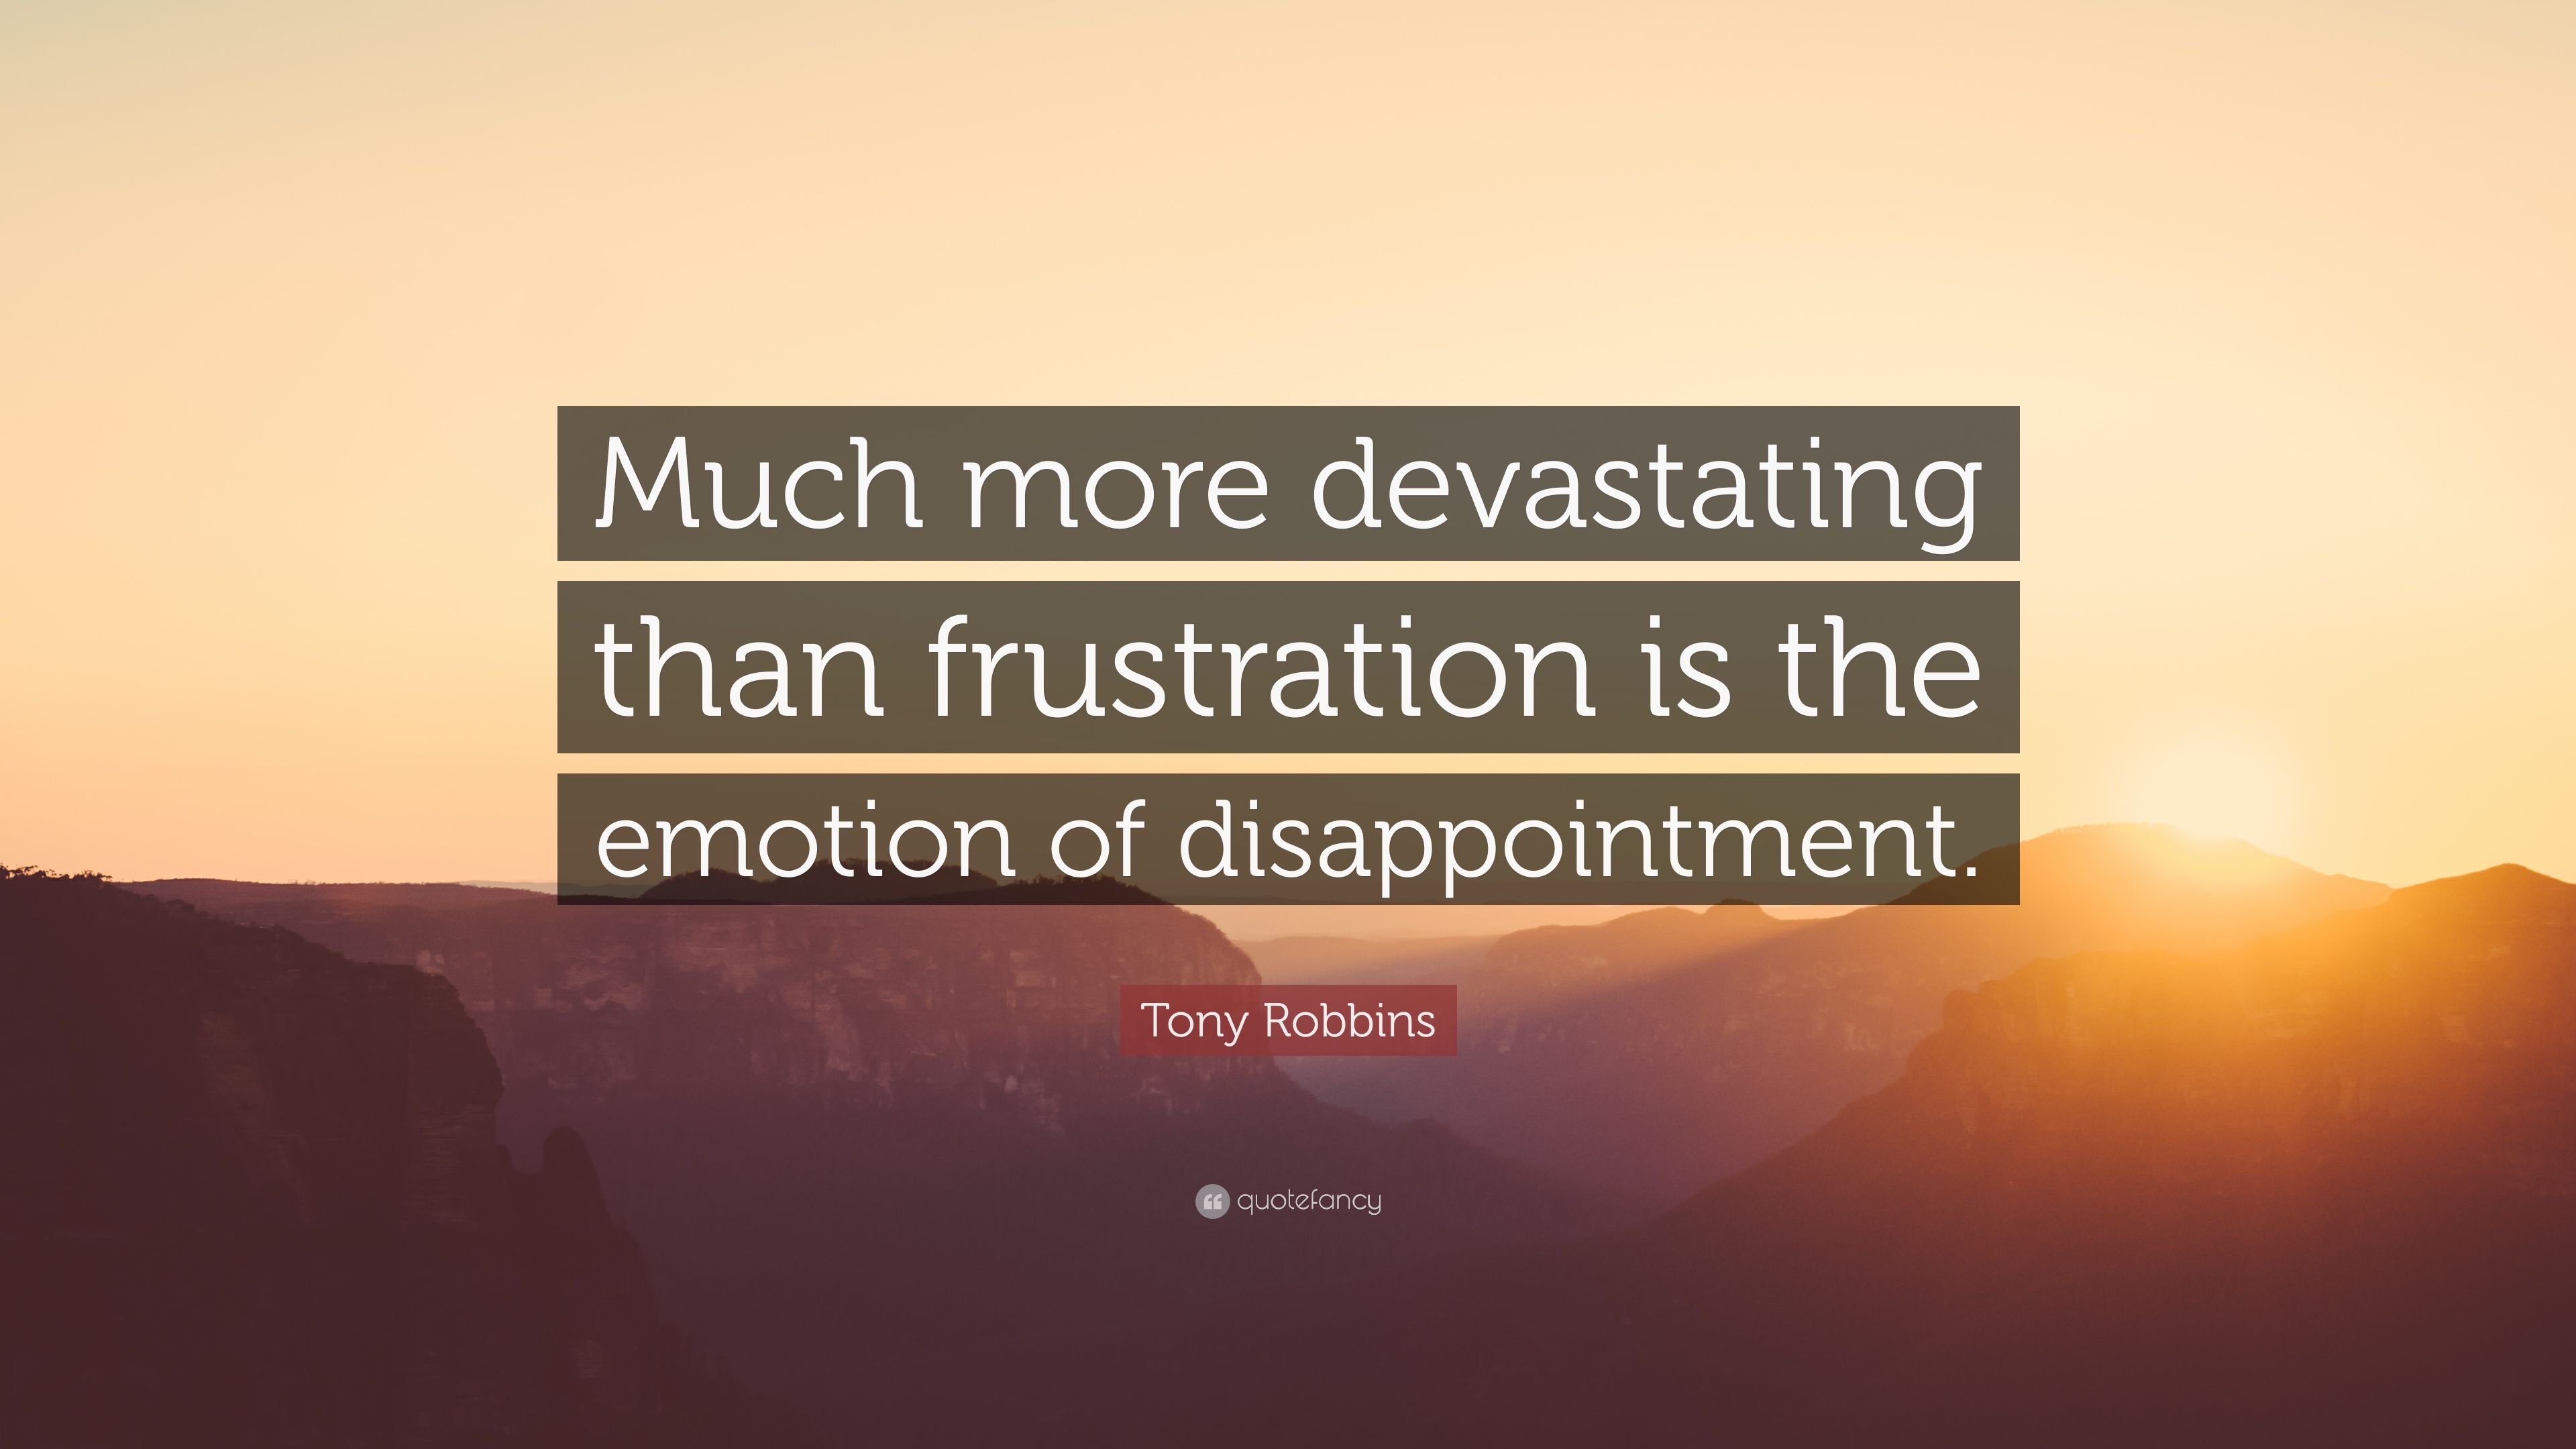 Tony Robbins Quote: “Much more devastating than frustration is the emotion of disappointment.” (12 wallpaper)